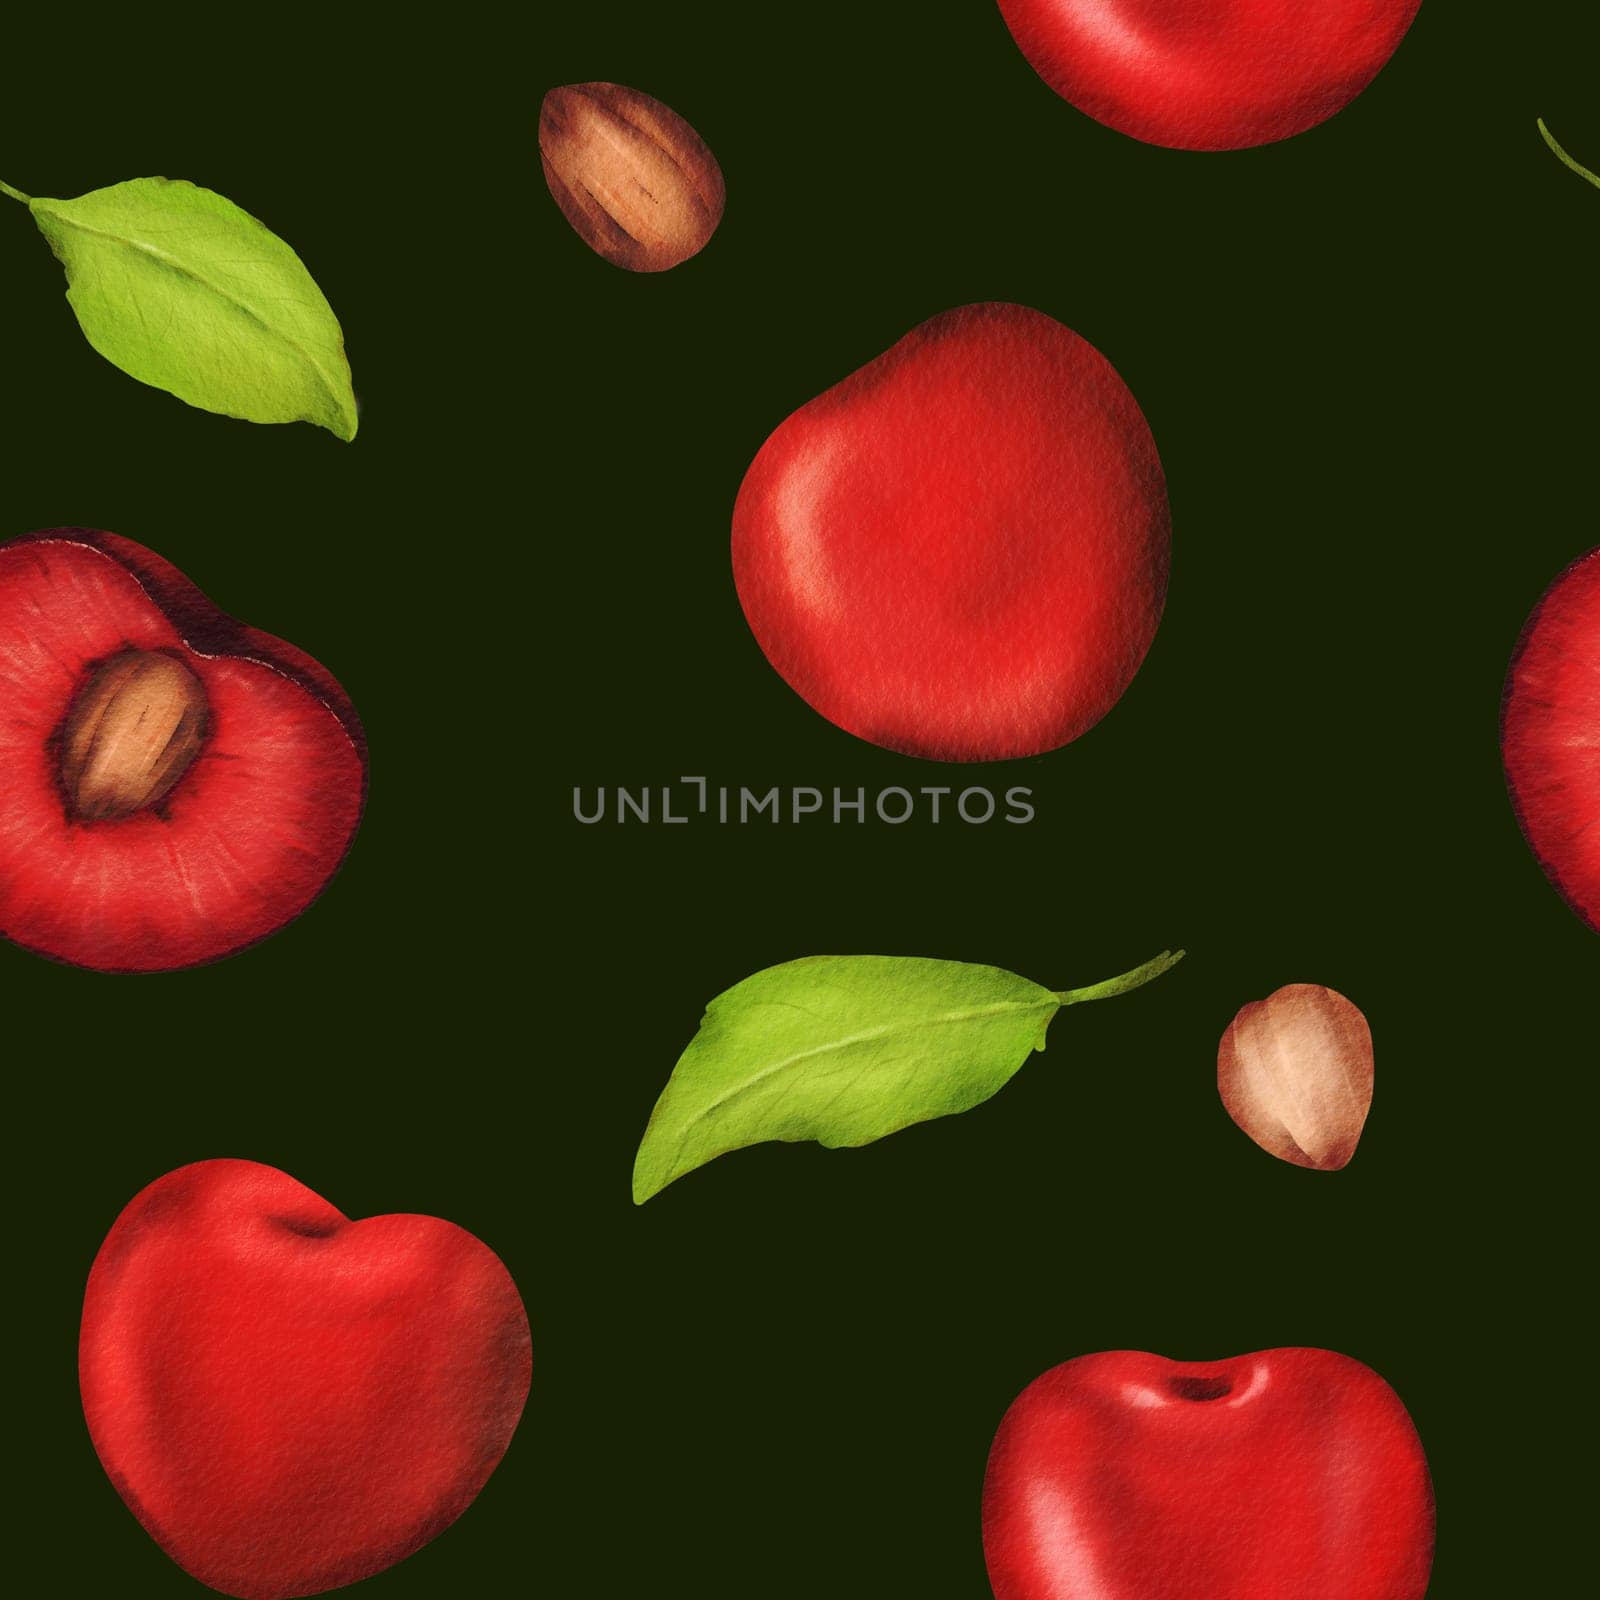 Seamless watercolor pattern with luscious, vibrant cherries. Dark background for kitchen decor, recipes, textiles, jam labels, aprons, packaging, juices, cherry sweets, and gum wrappers by Art_Mari_Ka